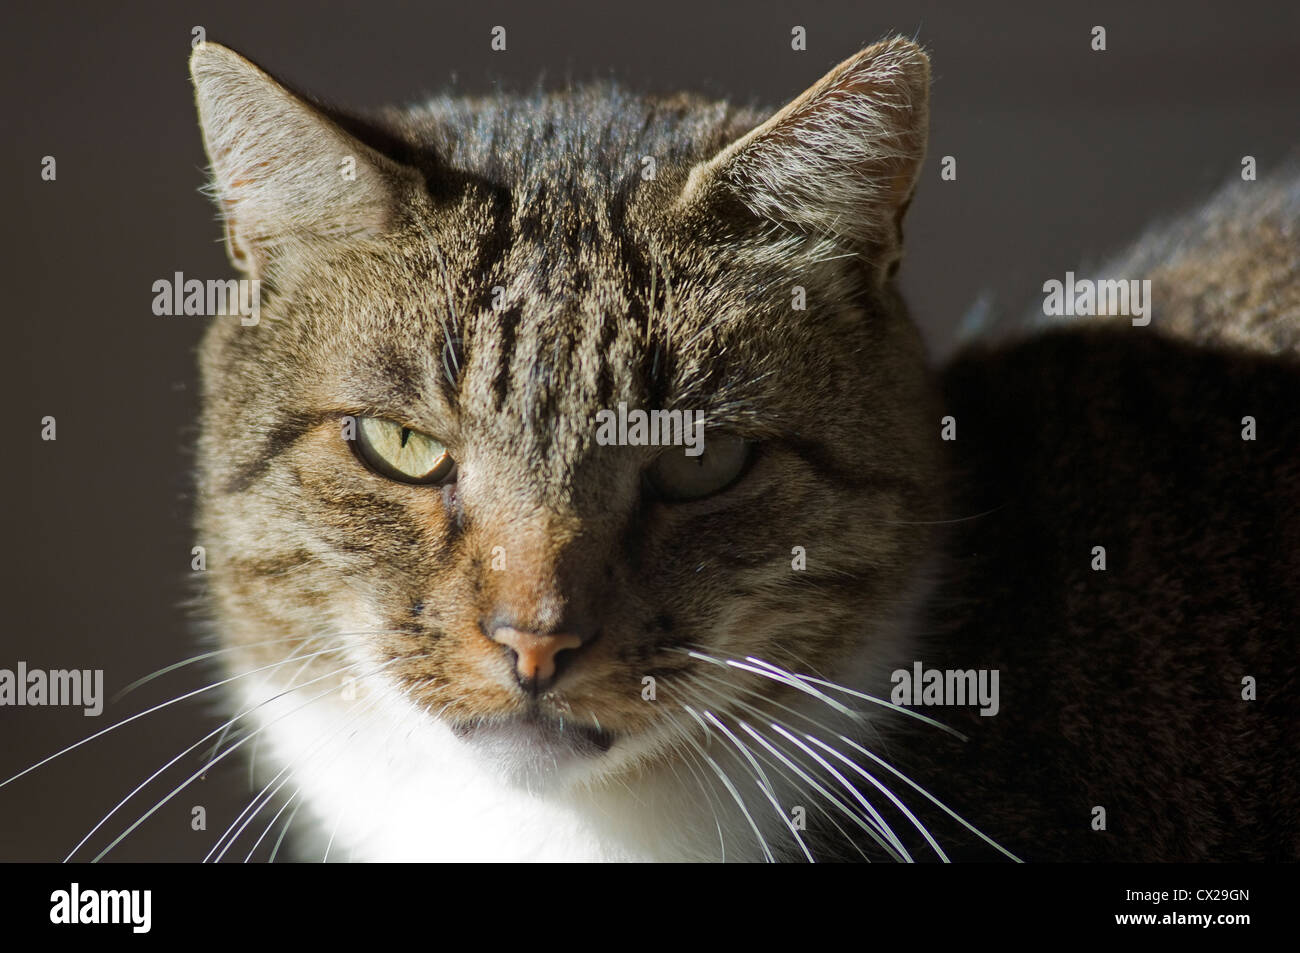 Portrait of a tomcat looking grimly at camera Stock Photo